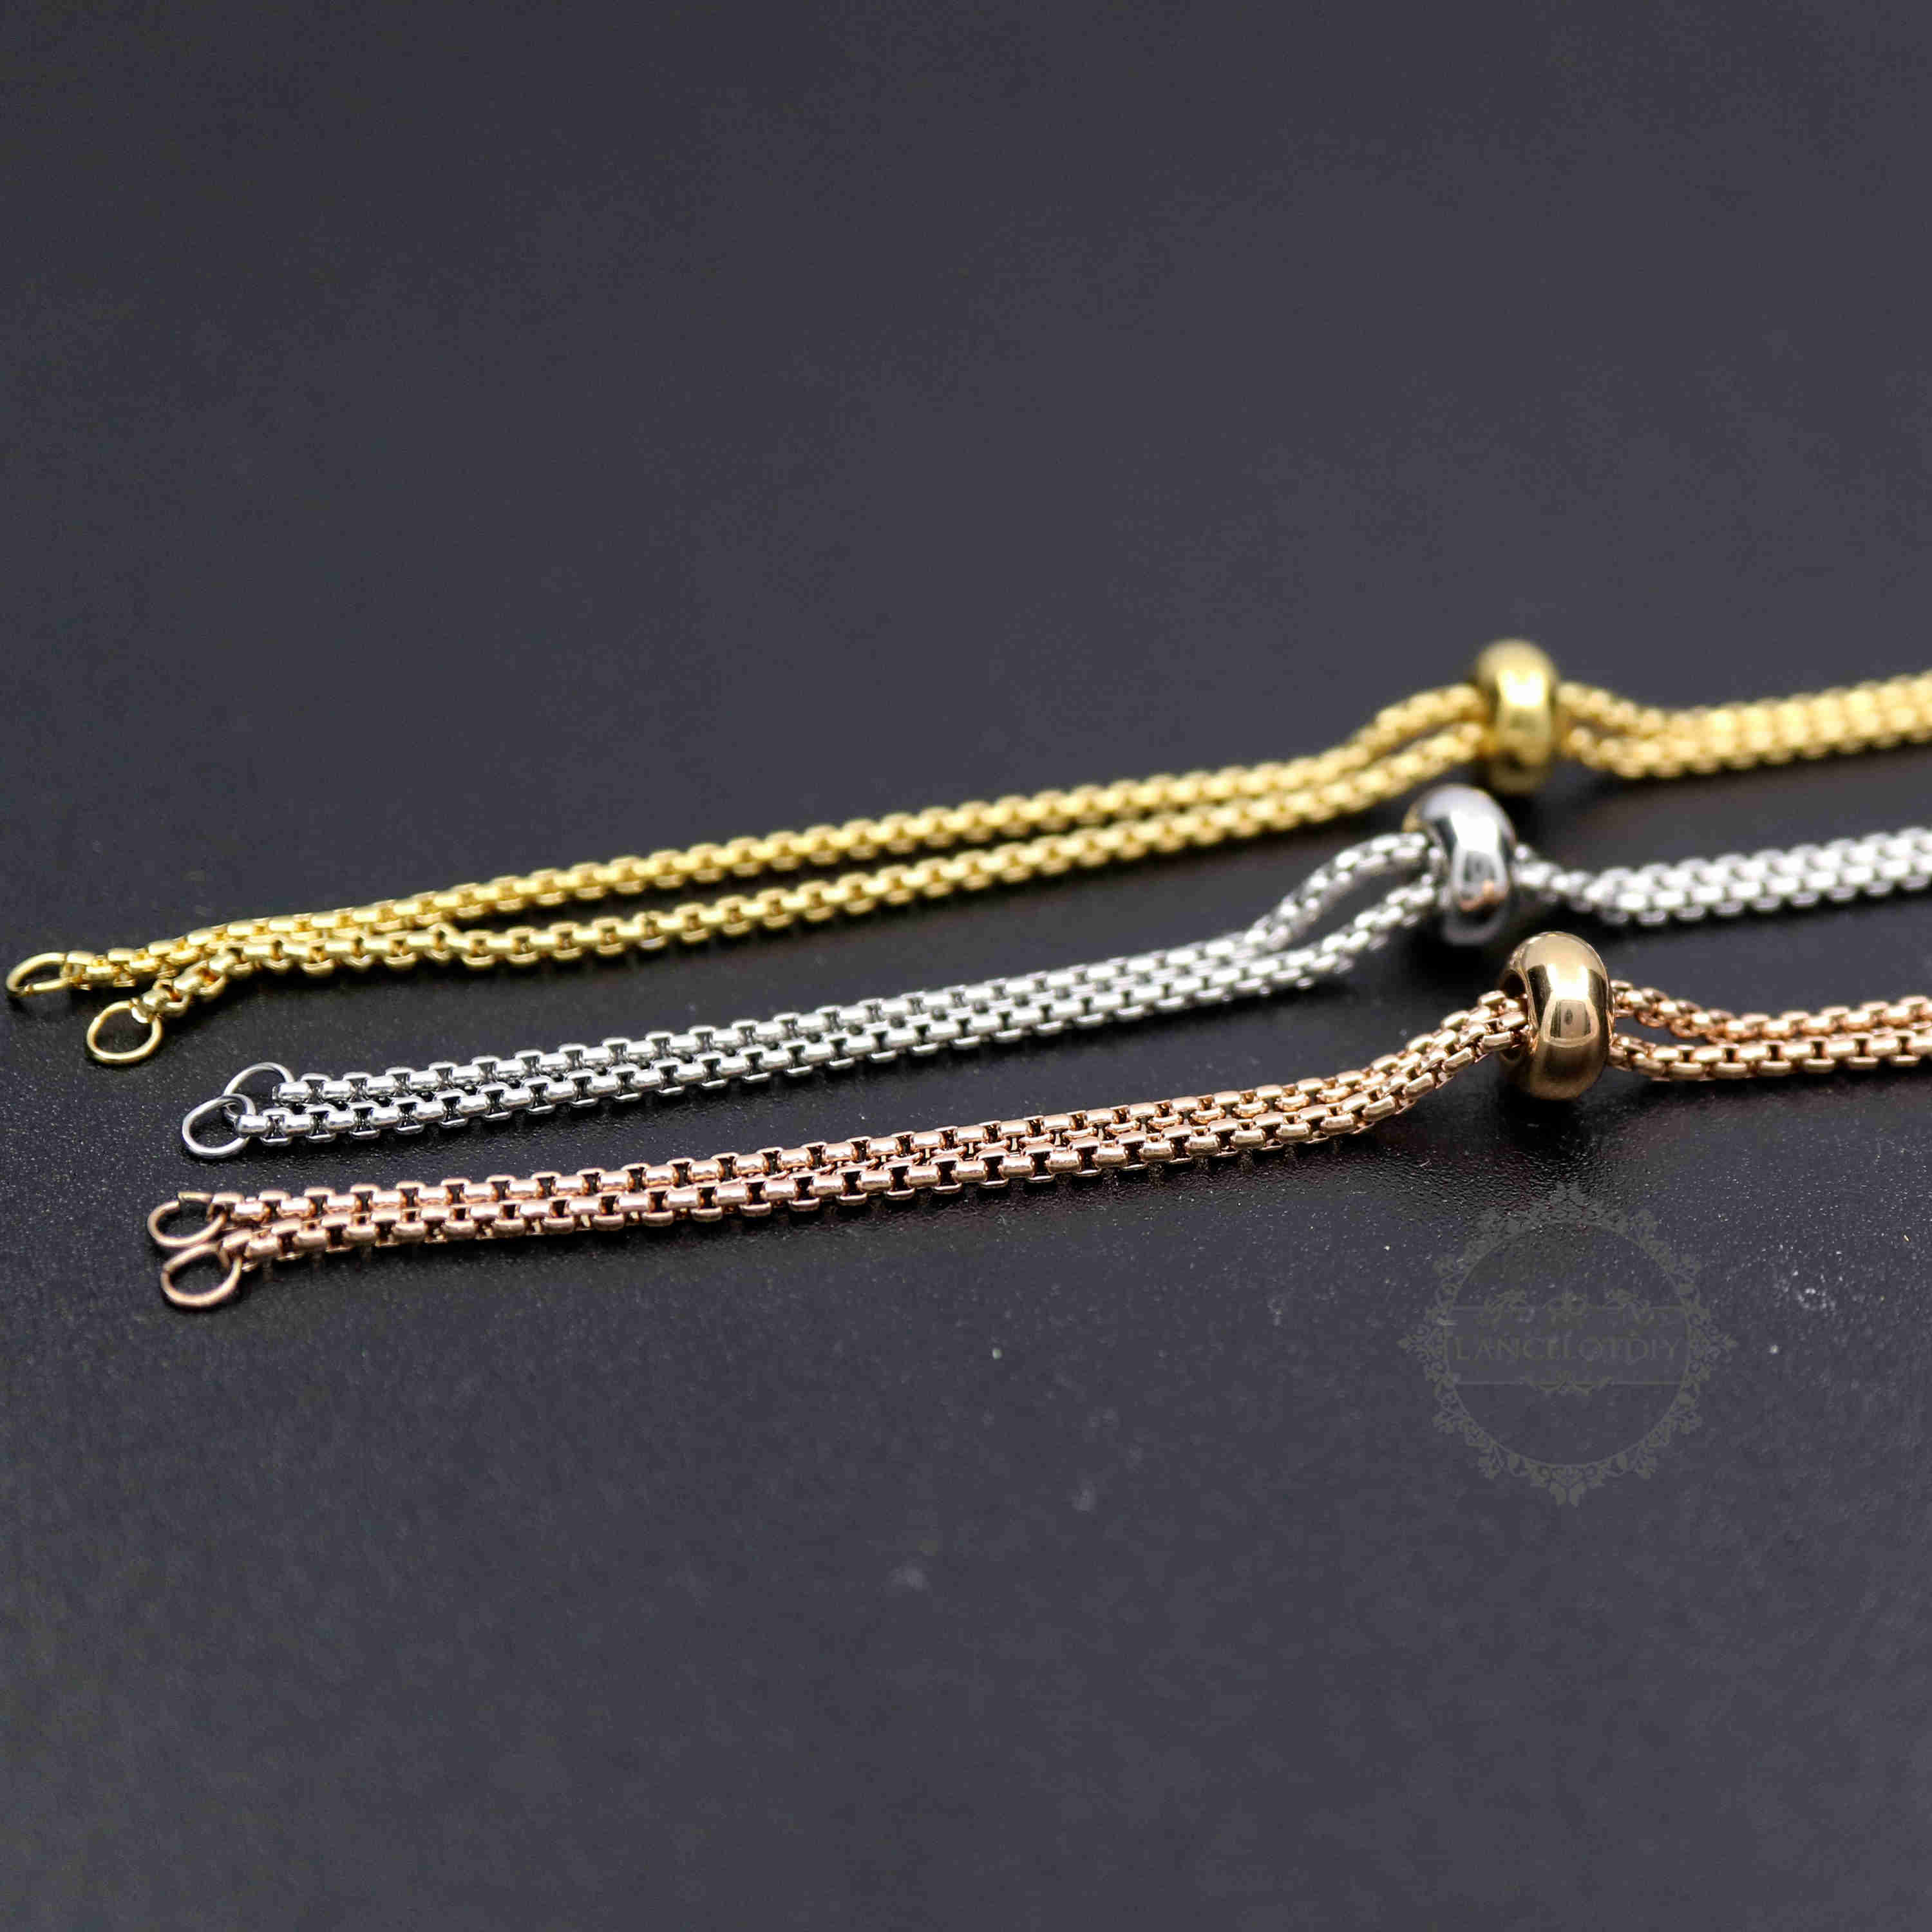 1pcs 11cm long rose gold silver stainless steel DIY charm bracelet with 1.8mm thick box chain adjustable bracelet supplies 1900187 - Click Image to Close